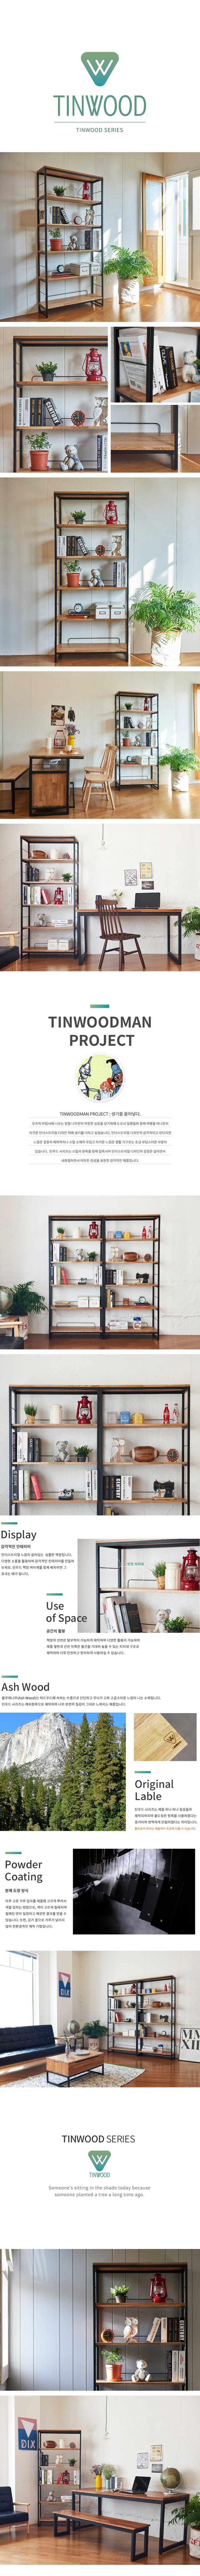 Tinwood_Scandi_Industrial_Bookcase_Display_Shelf_Online_Furniture_Singapore_Product_Information_by_born_in_colour